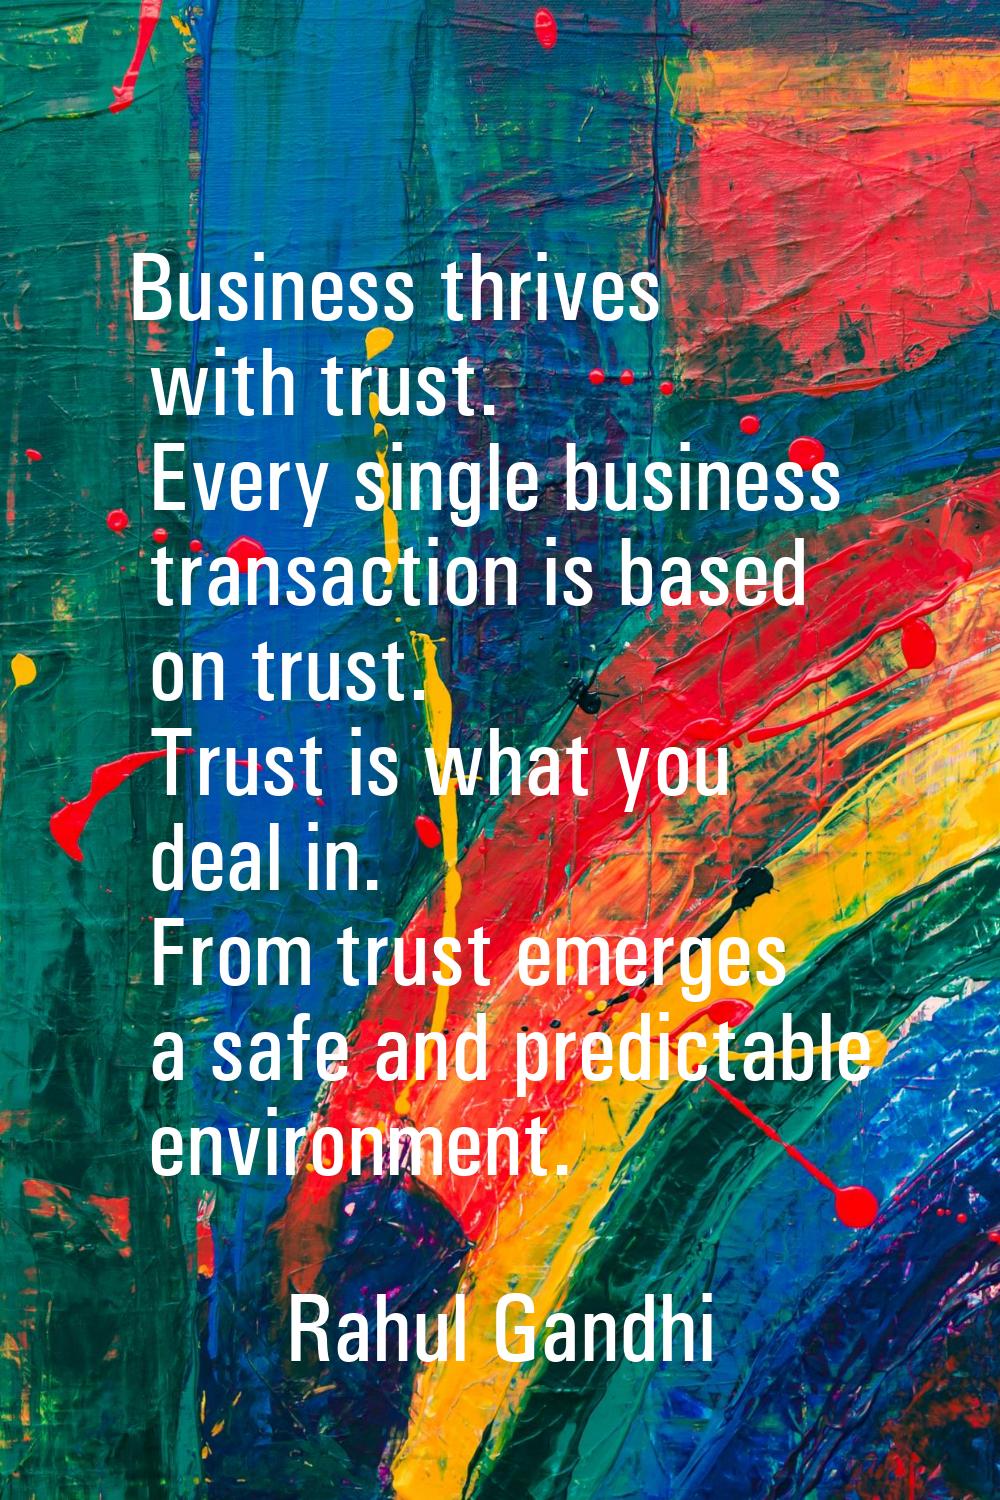 Business thrives with trust. Every single business transaction is based on trust. Trust is what you